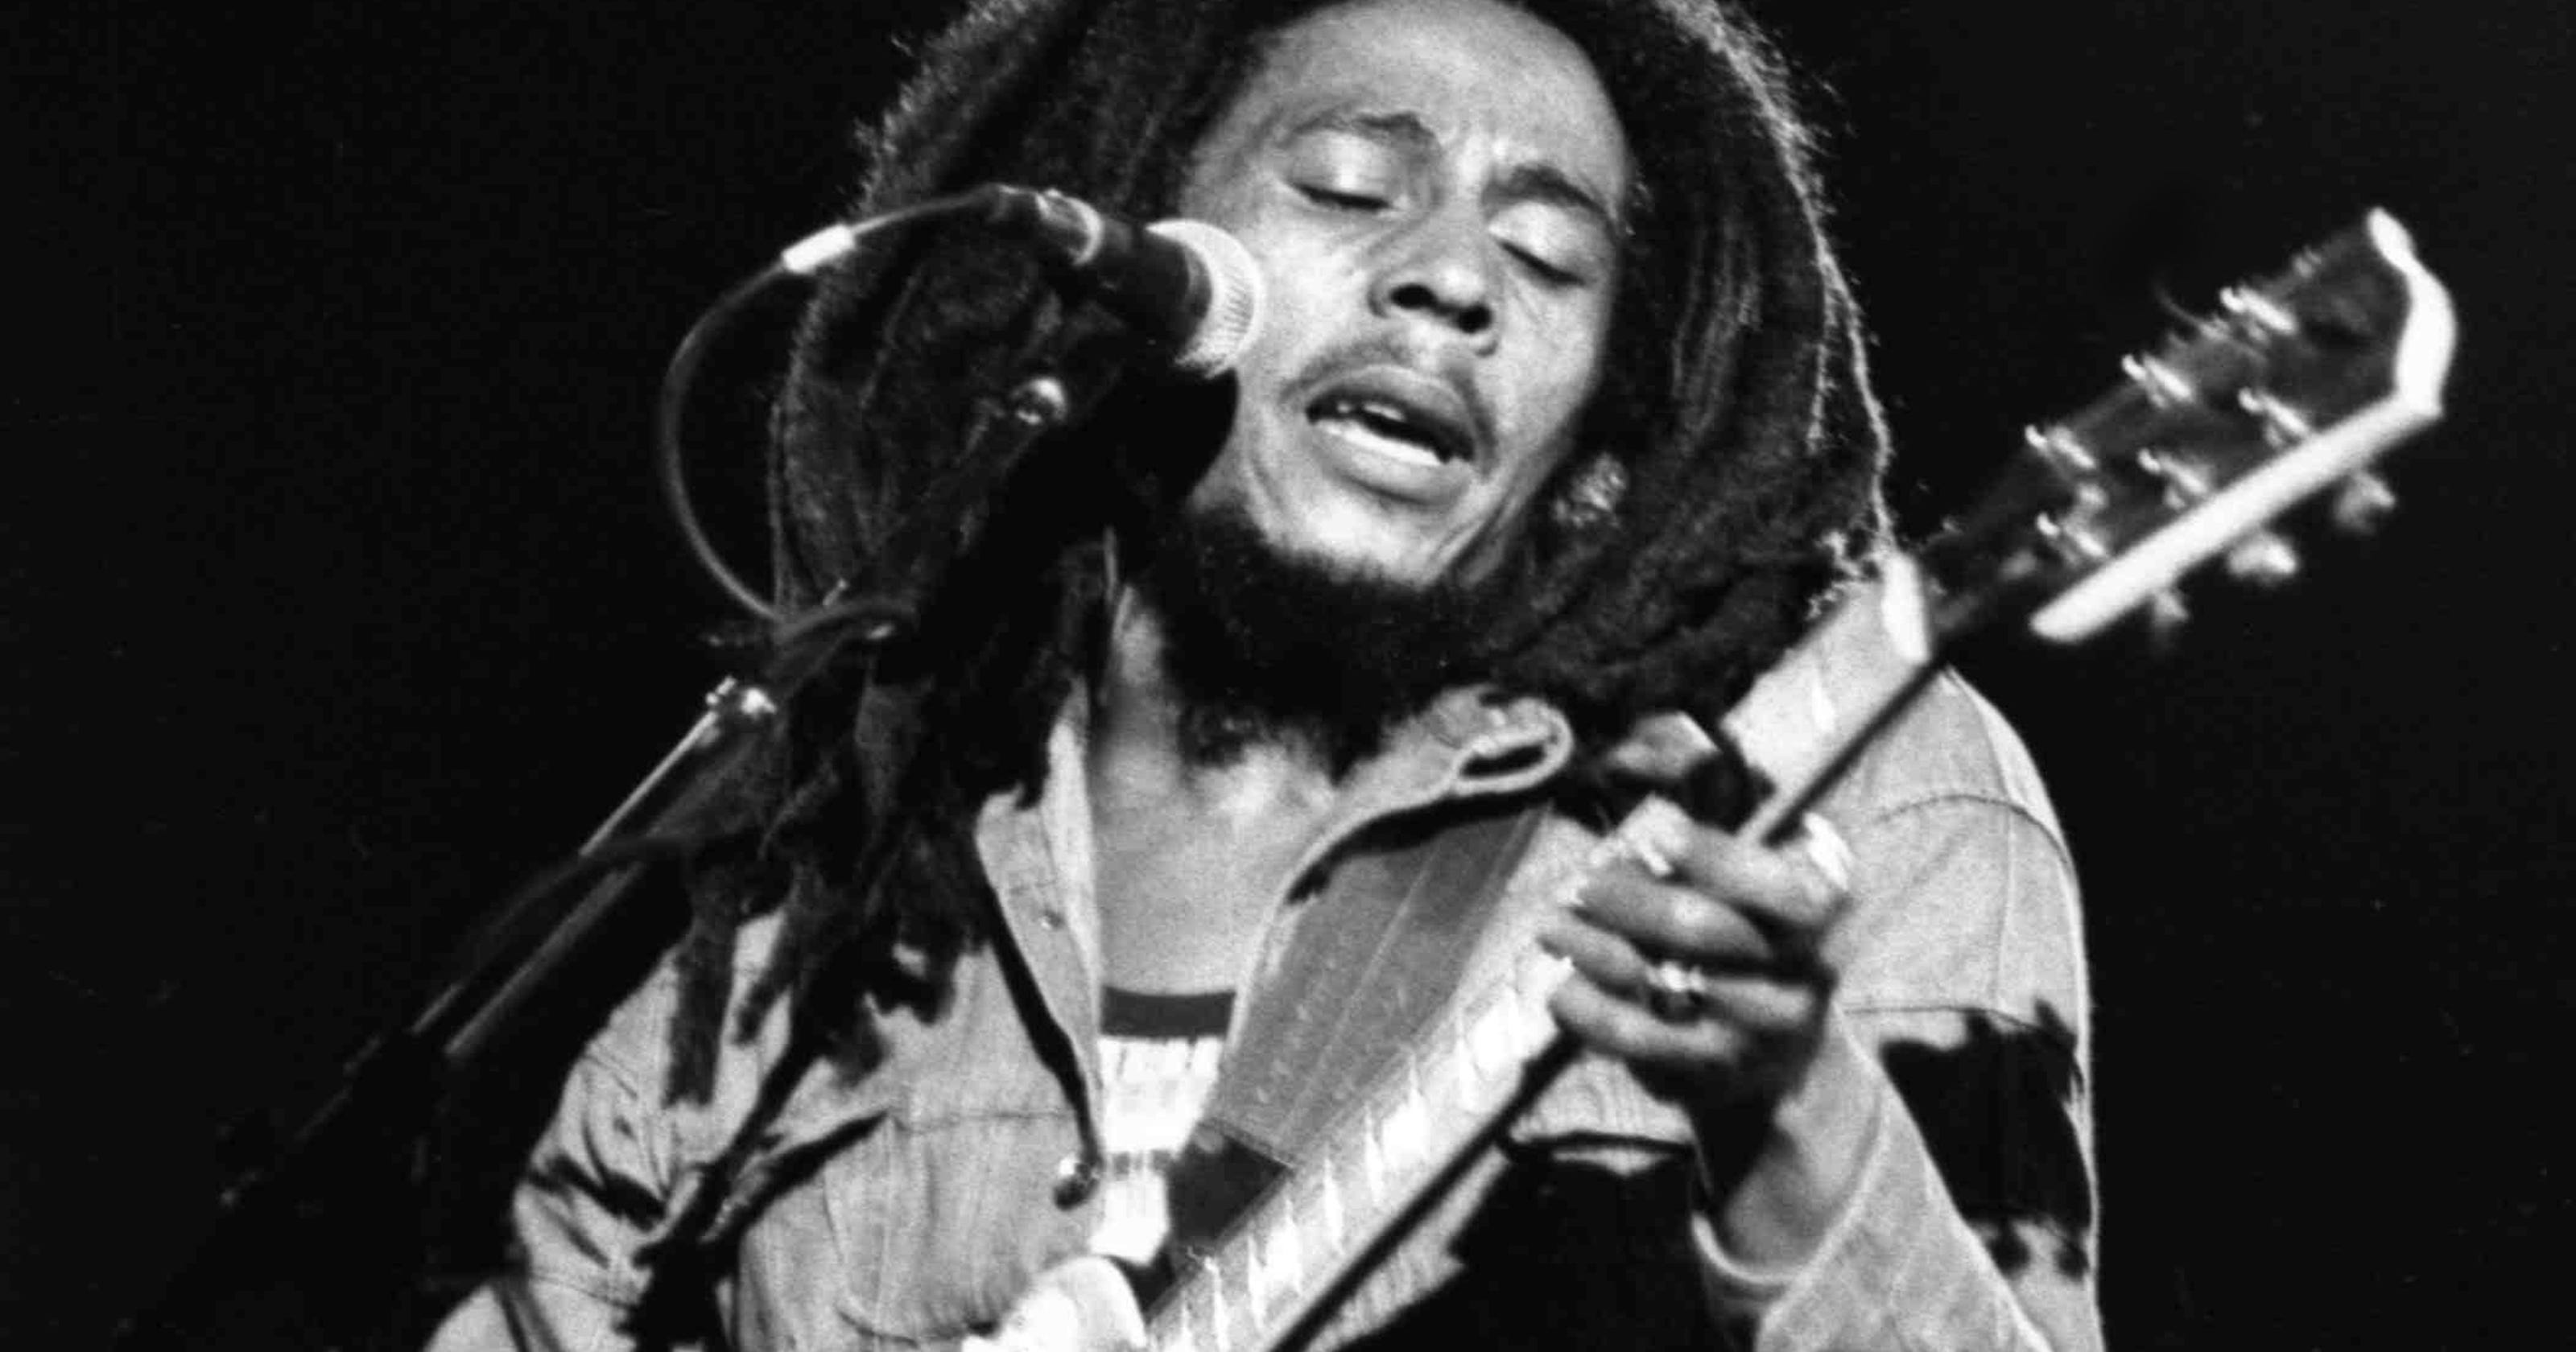 Listen To These 7 Bob Marley Songs To Celebrate His 70th Birthday